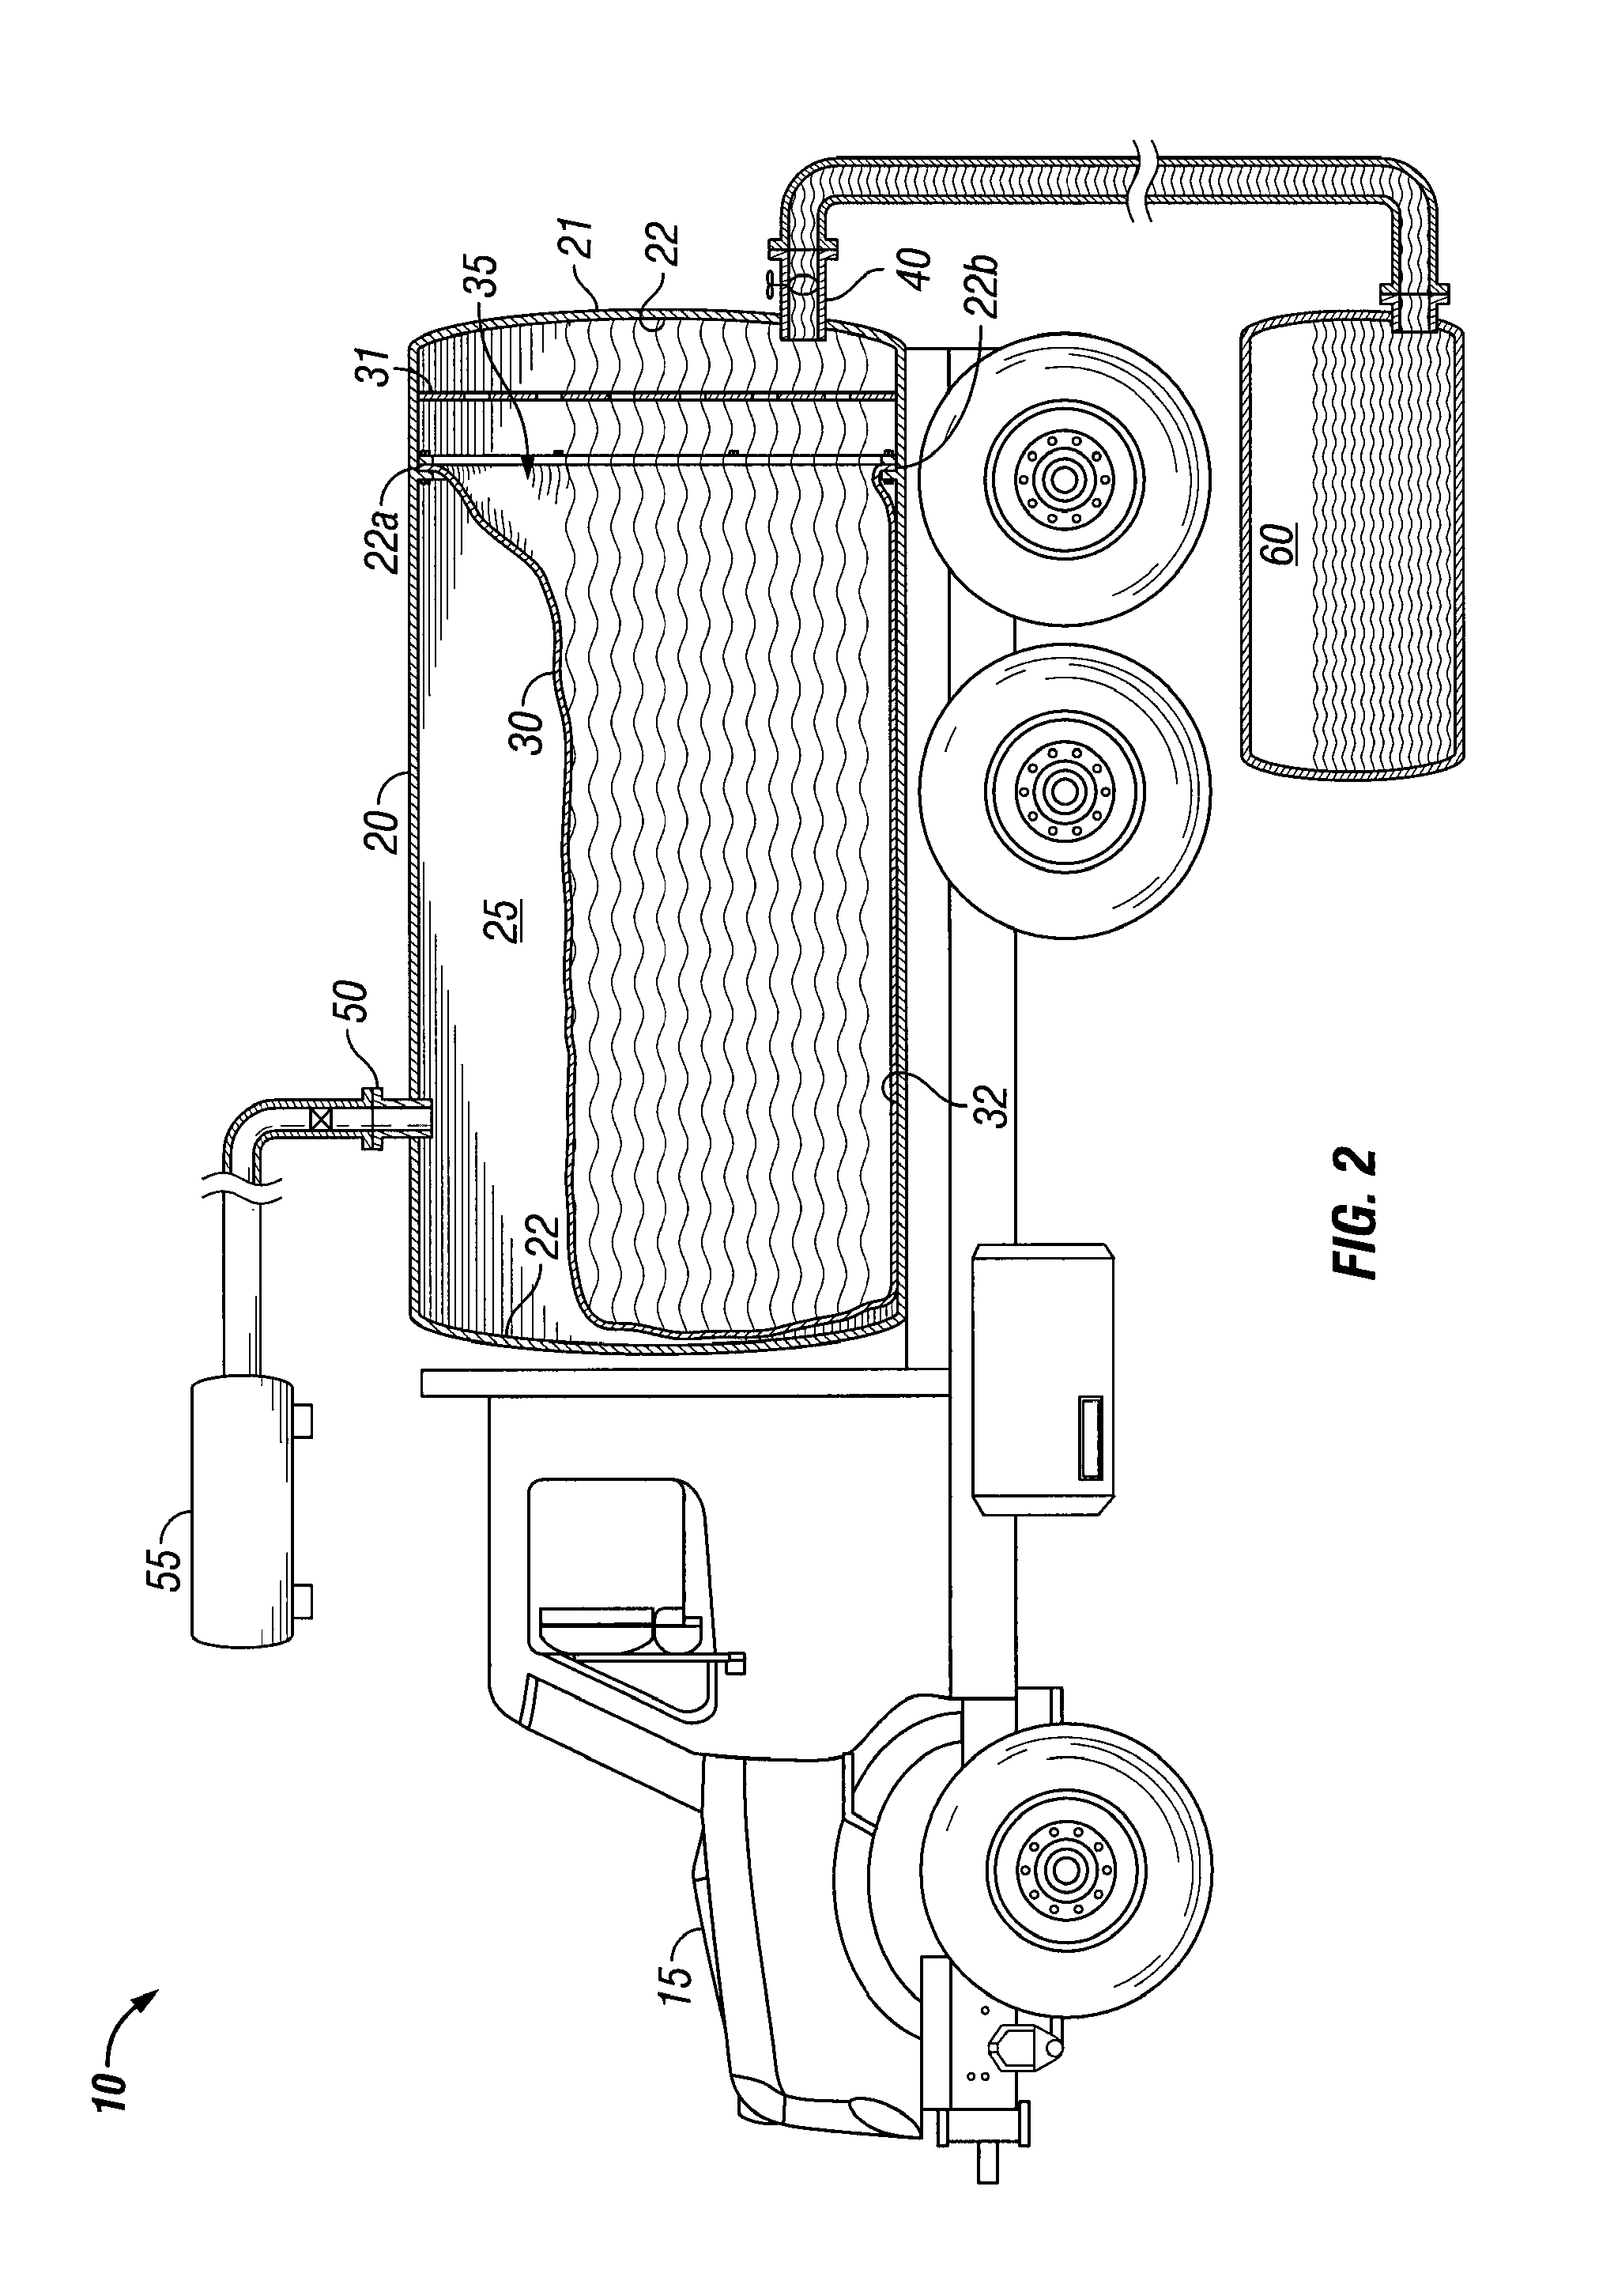 Multilayered bladder and carbon scrubber for storage tank